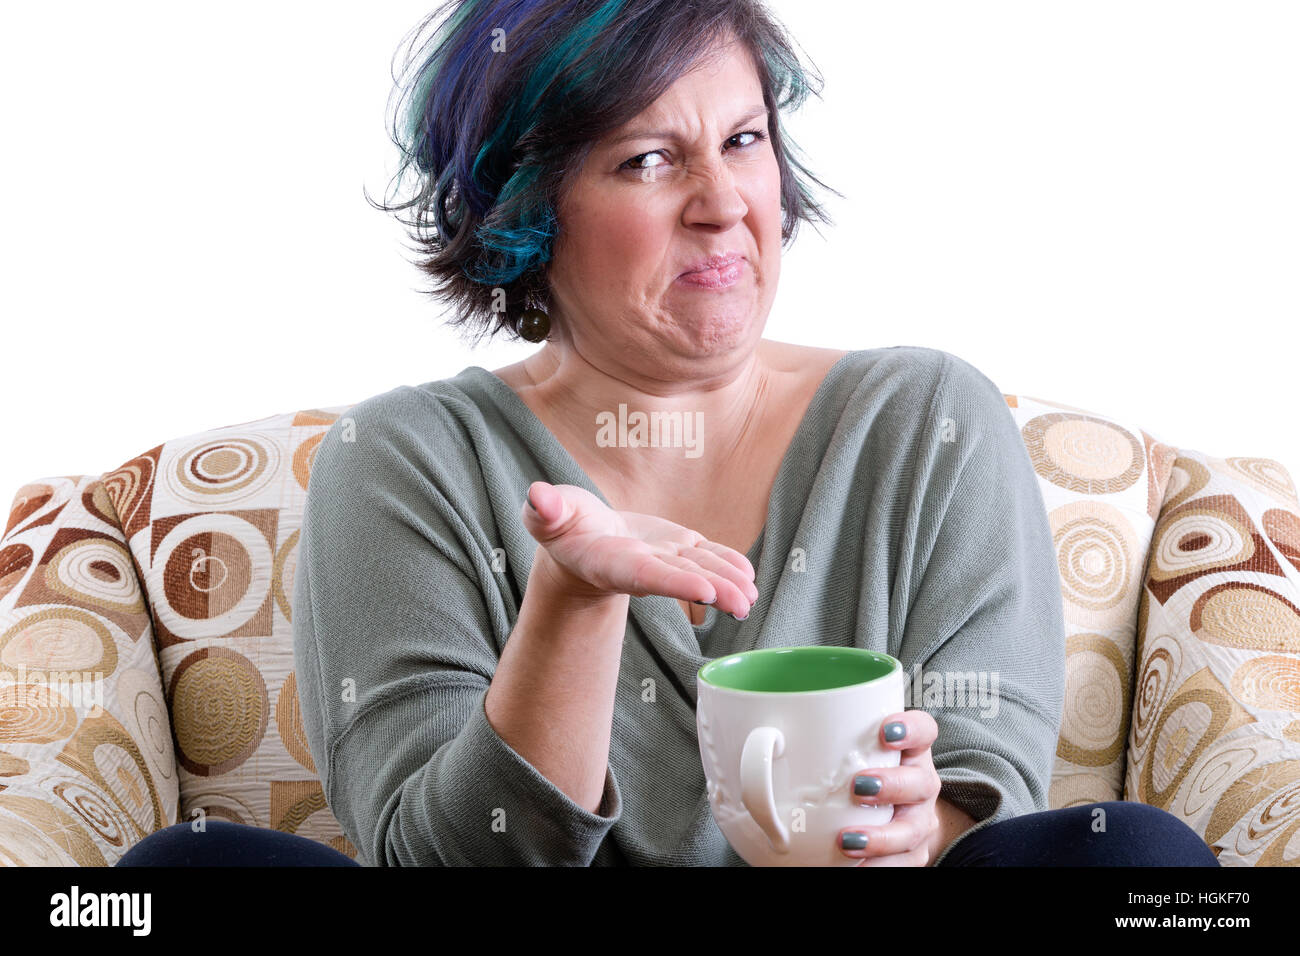 Disgusted woman in chair gesturing with hand to cup of tea, white background Stock Photo